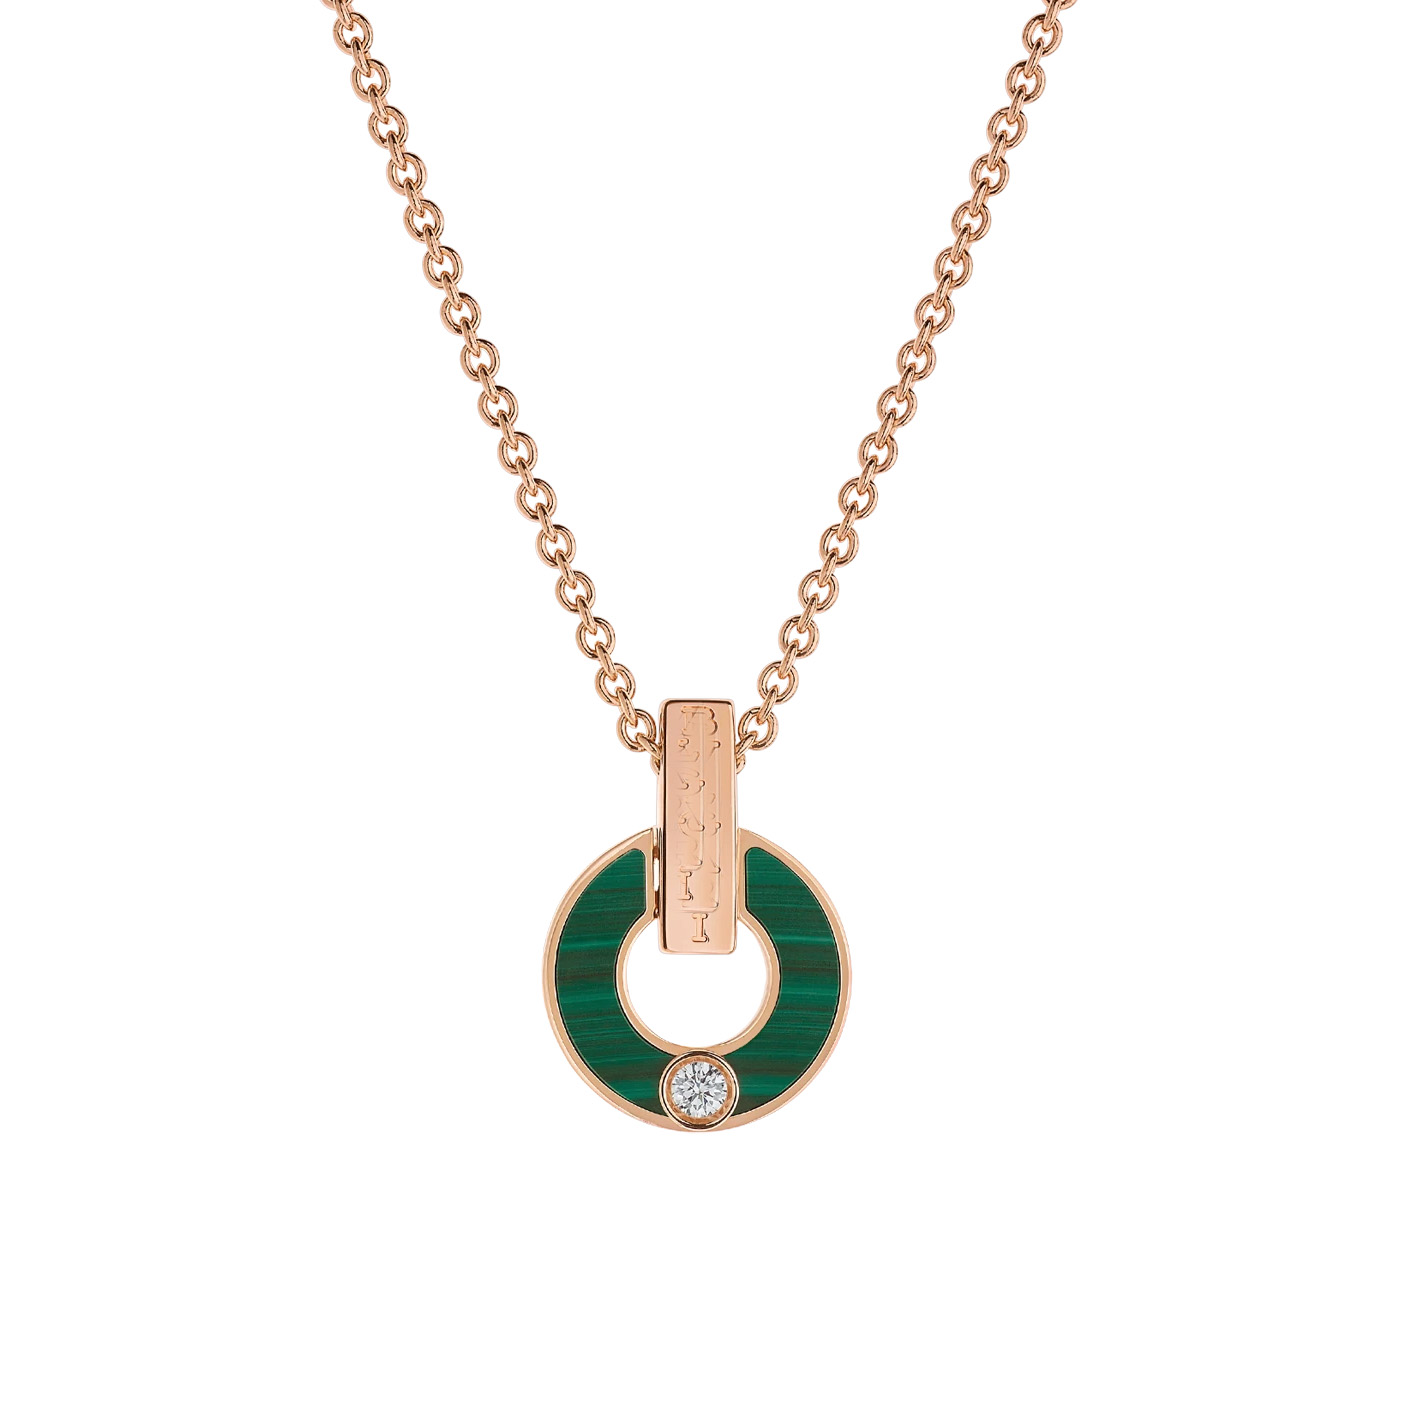 Wholesale OEM made design Openwork 18 kt rose gold OEM/ODM Jewelry necklace set with malachite elements and a round brilliant-cut diamond custom jewelry manufacturers china